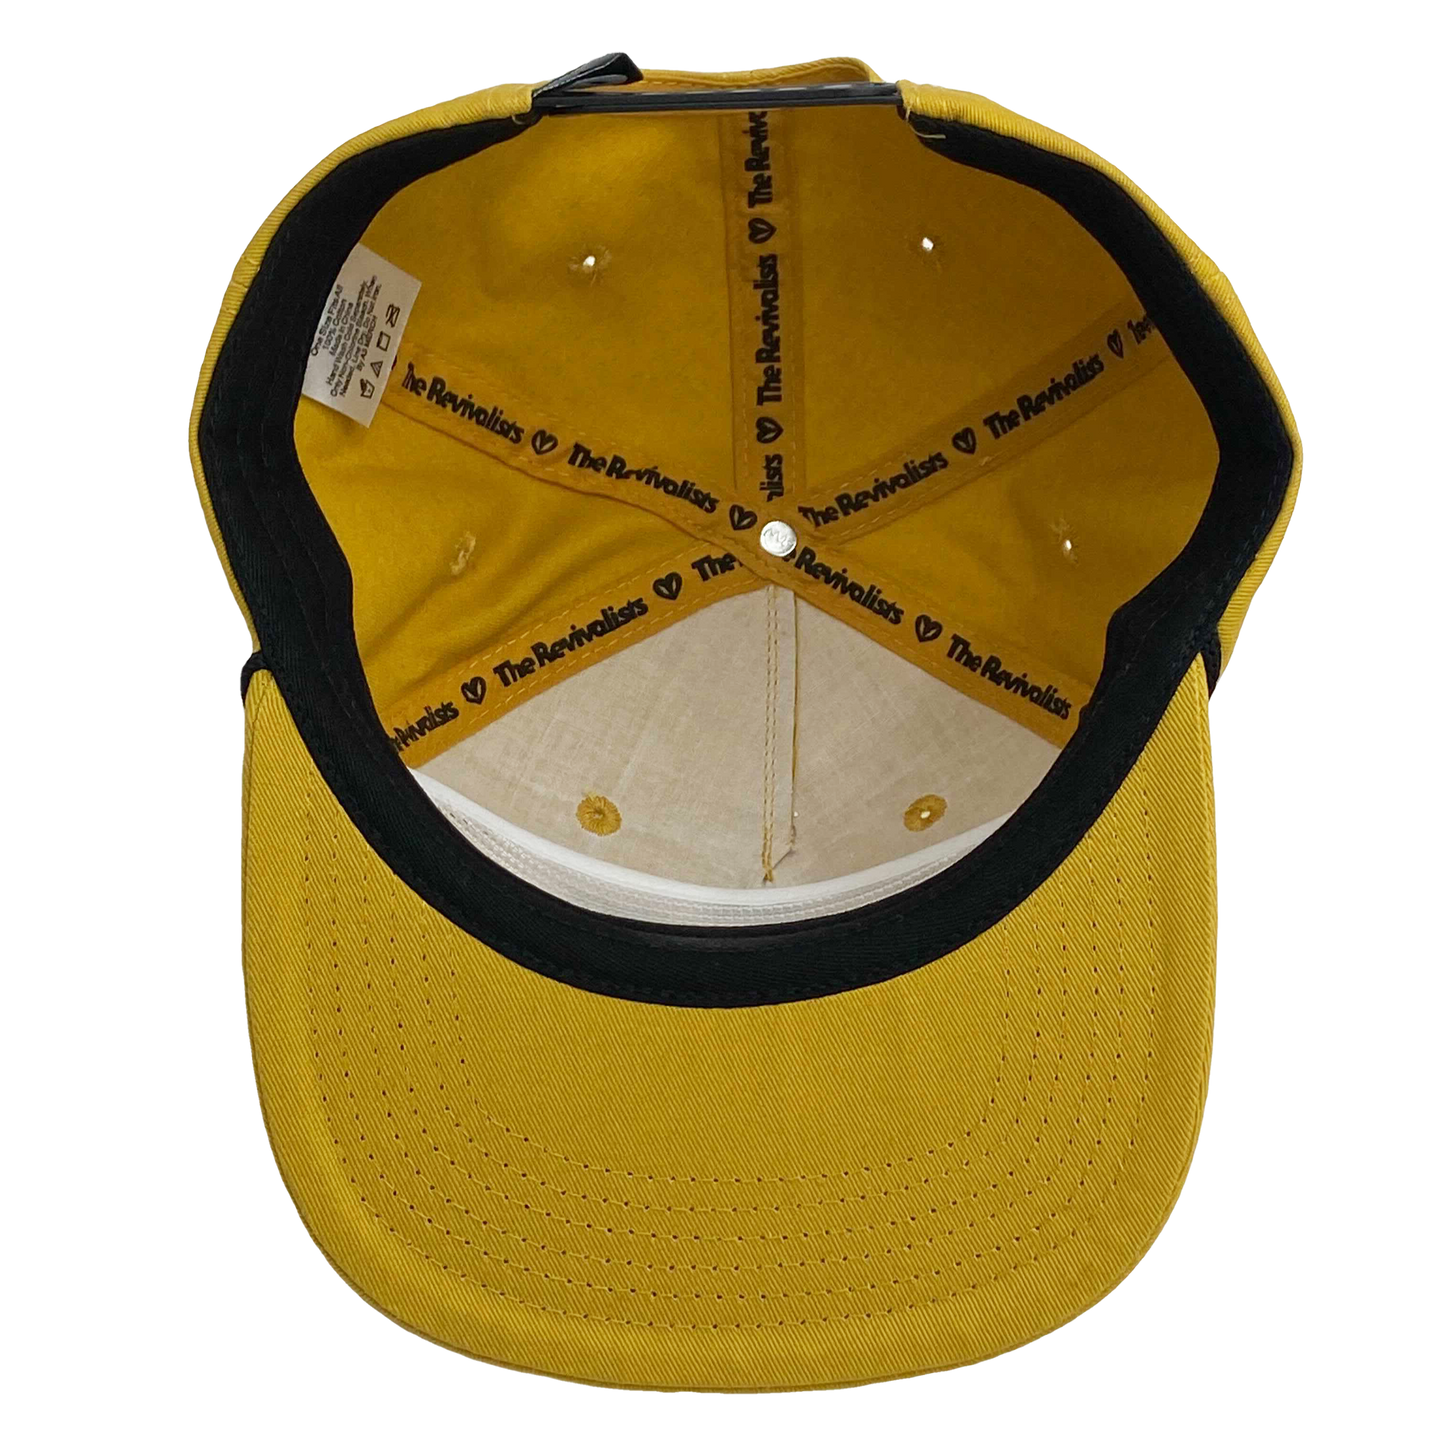 Into The Stars Yellow Hat